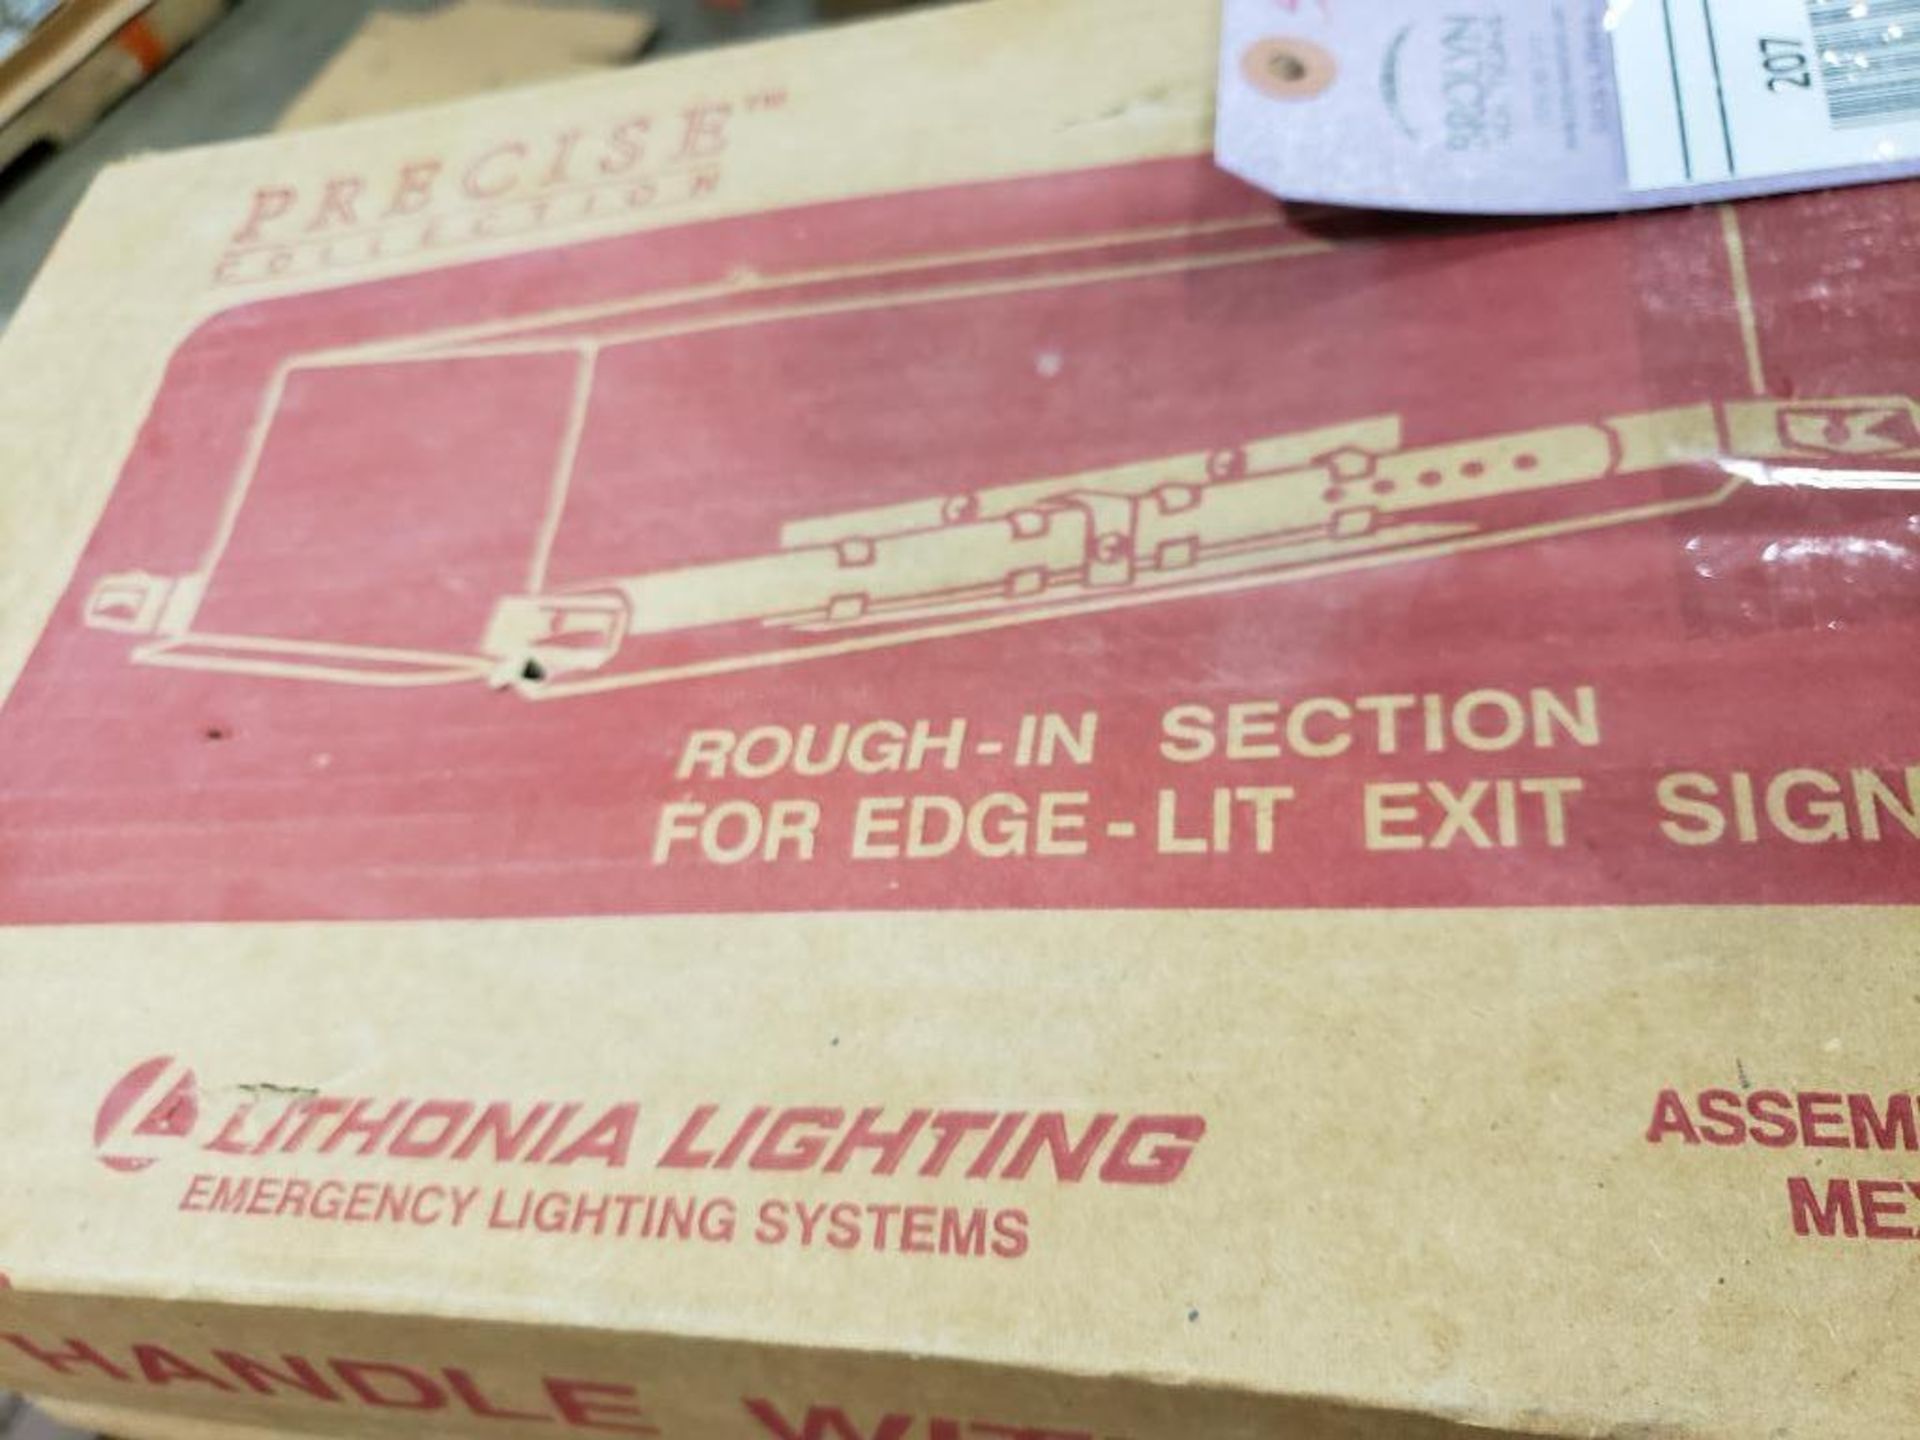 Qty 5 - Lithonia Lighting emergency lighting systems rough in section for edge lit exit sign. New.